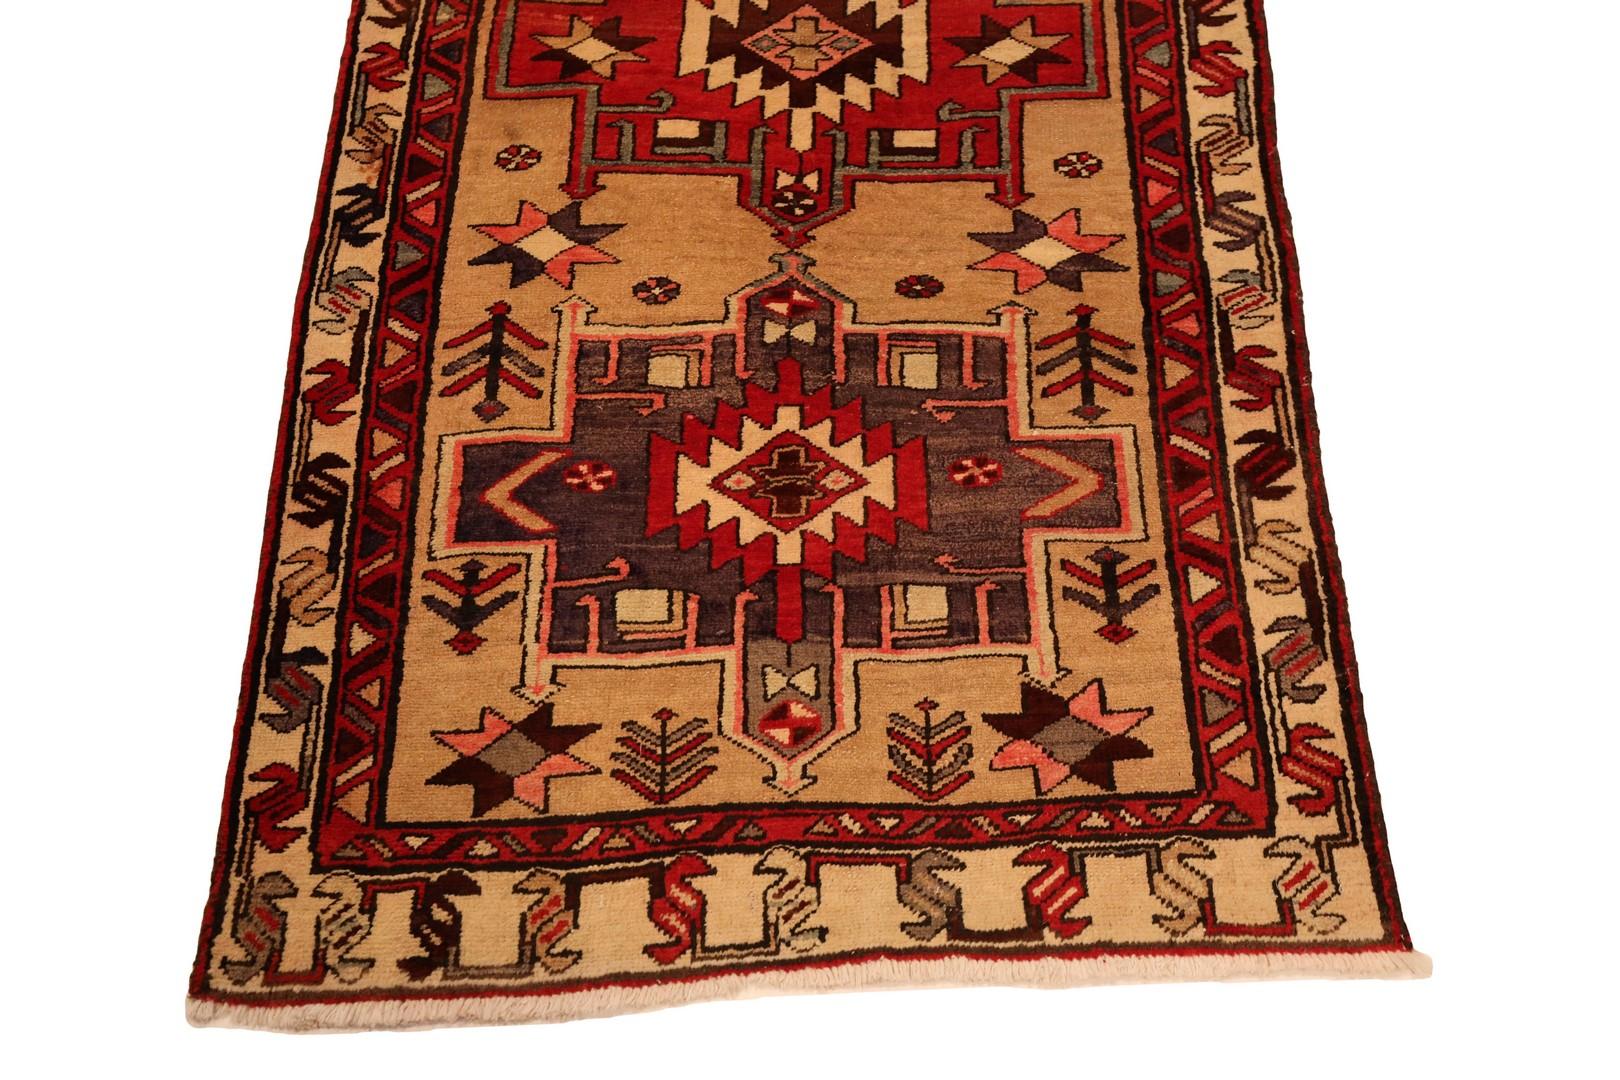 Hand-Knotted North-West Persian Semi-Antique Runner - 2'11